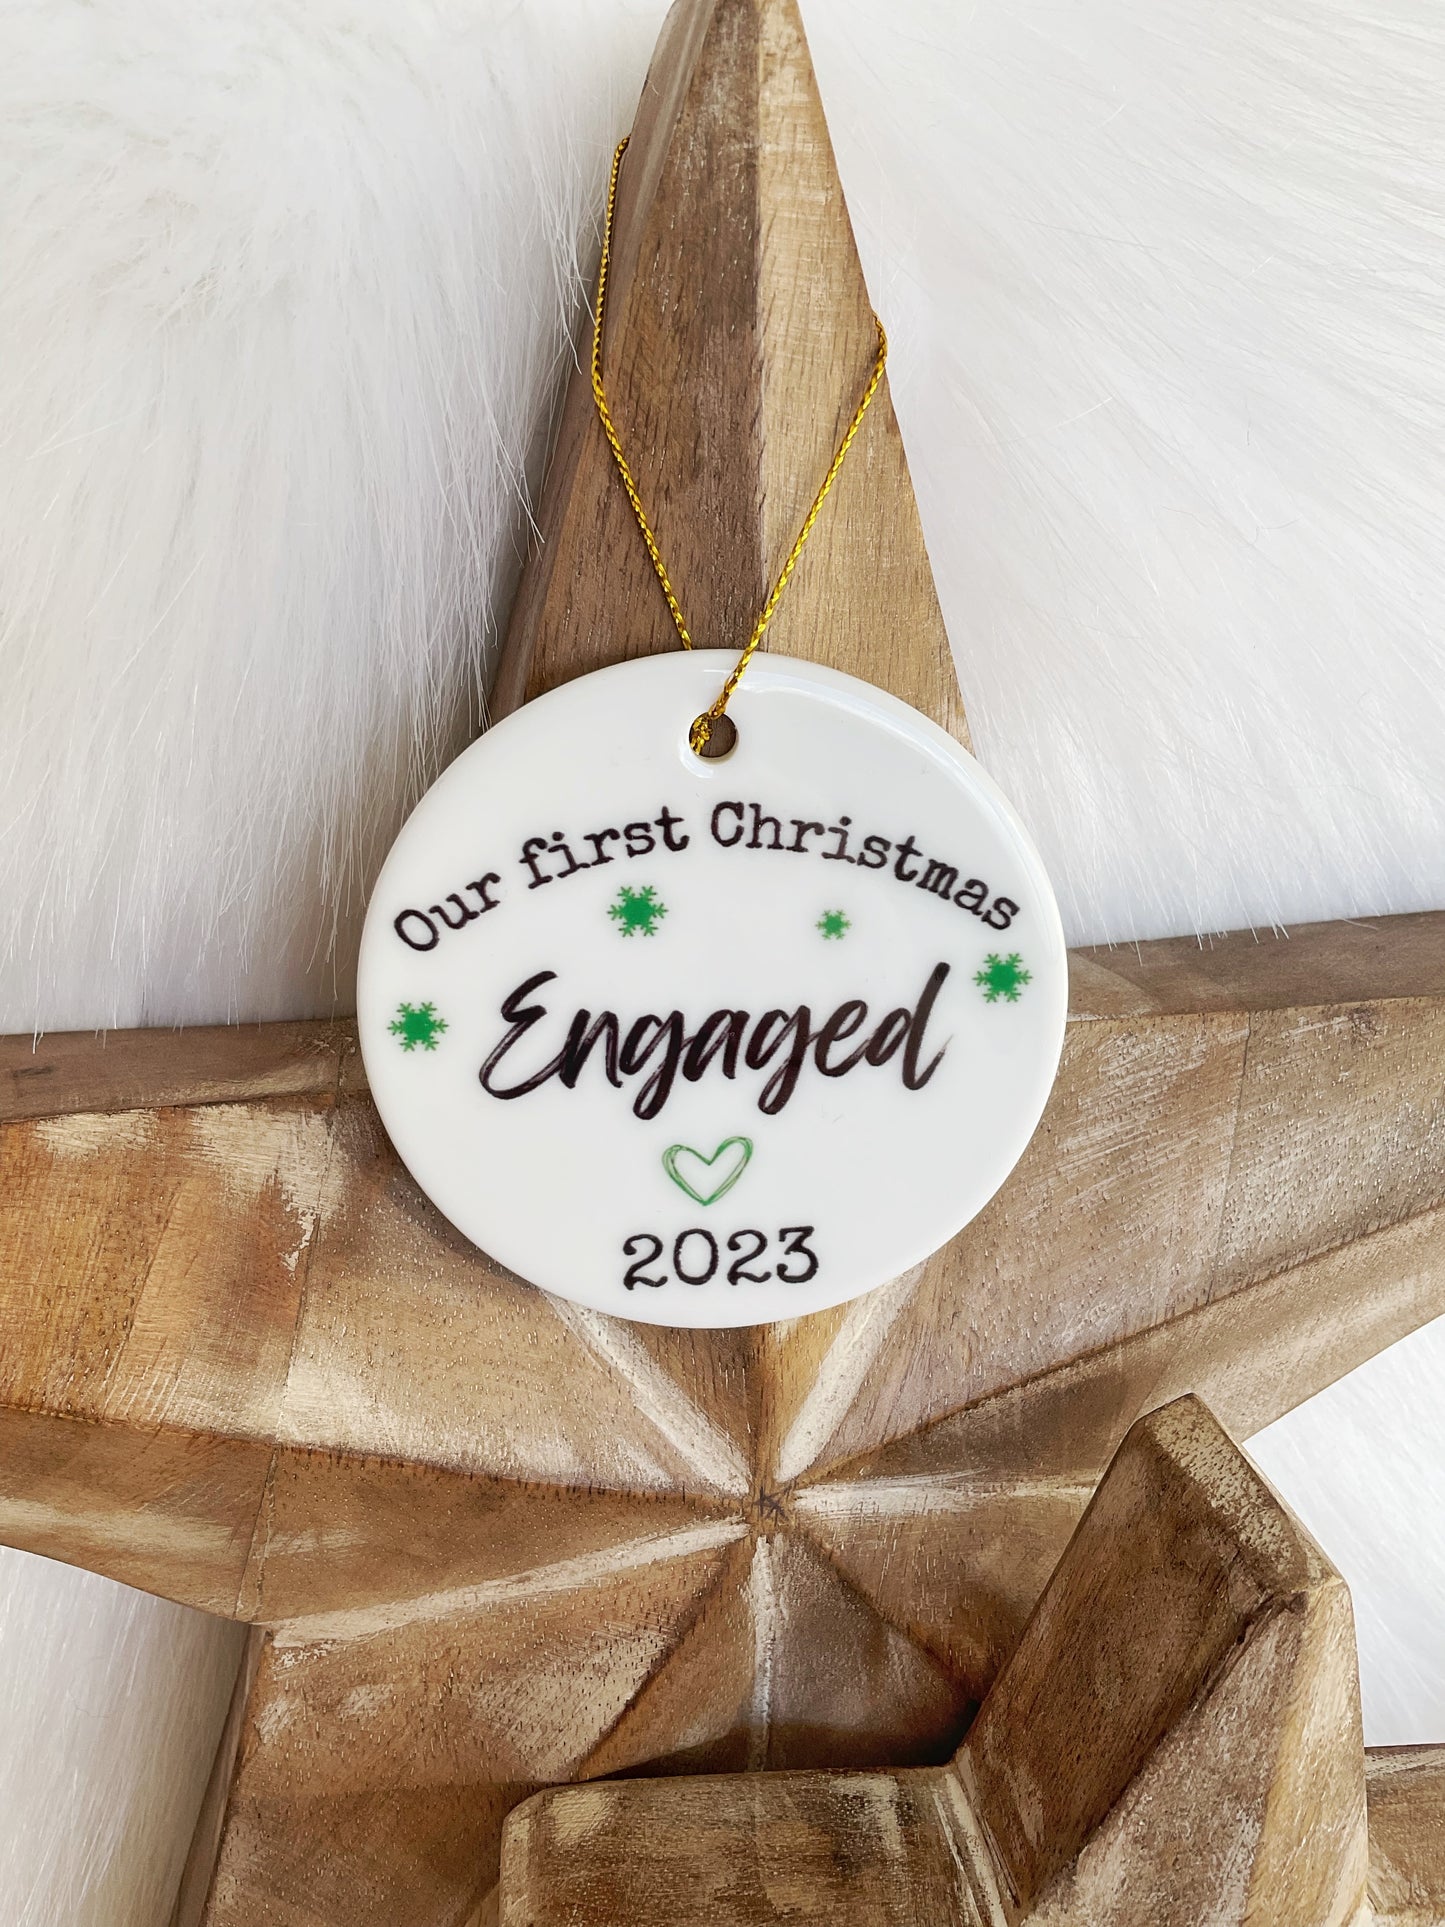 Our first Christmas engaged 2023 - Ceramic decoration